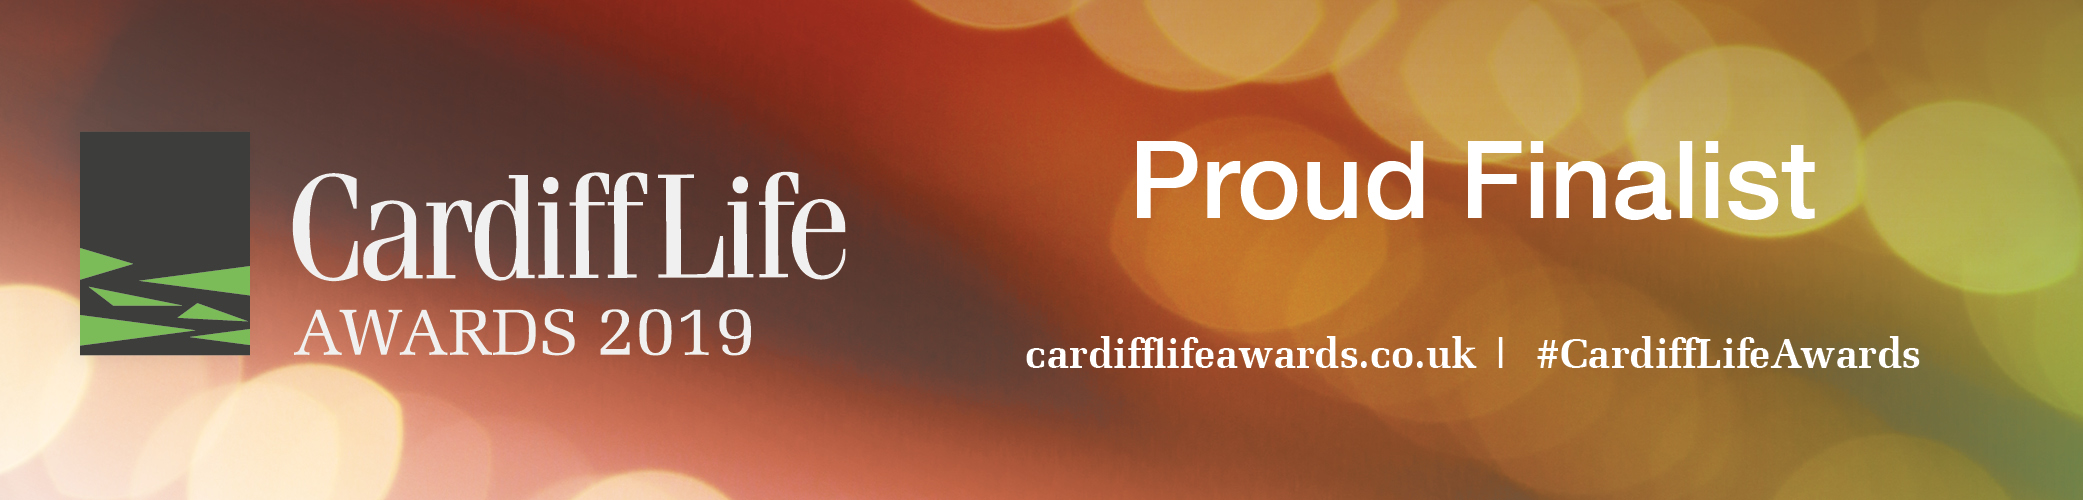 Proud Finalist at the Cardiff Life Awards